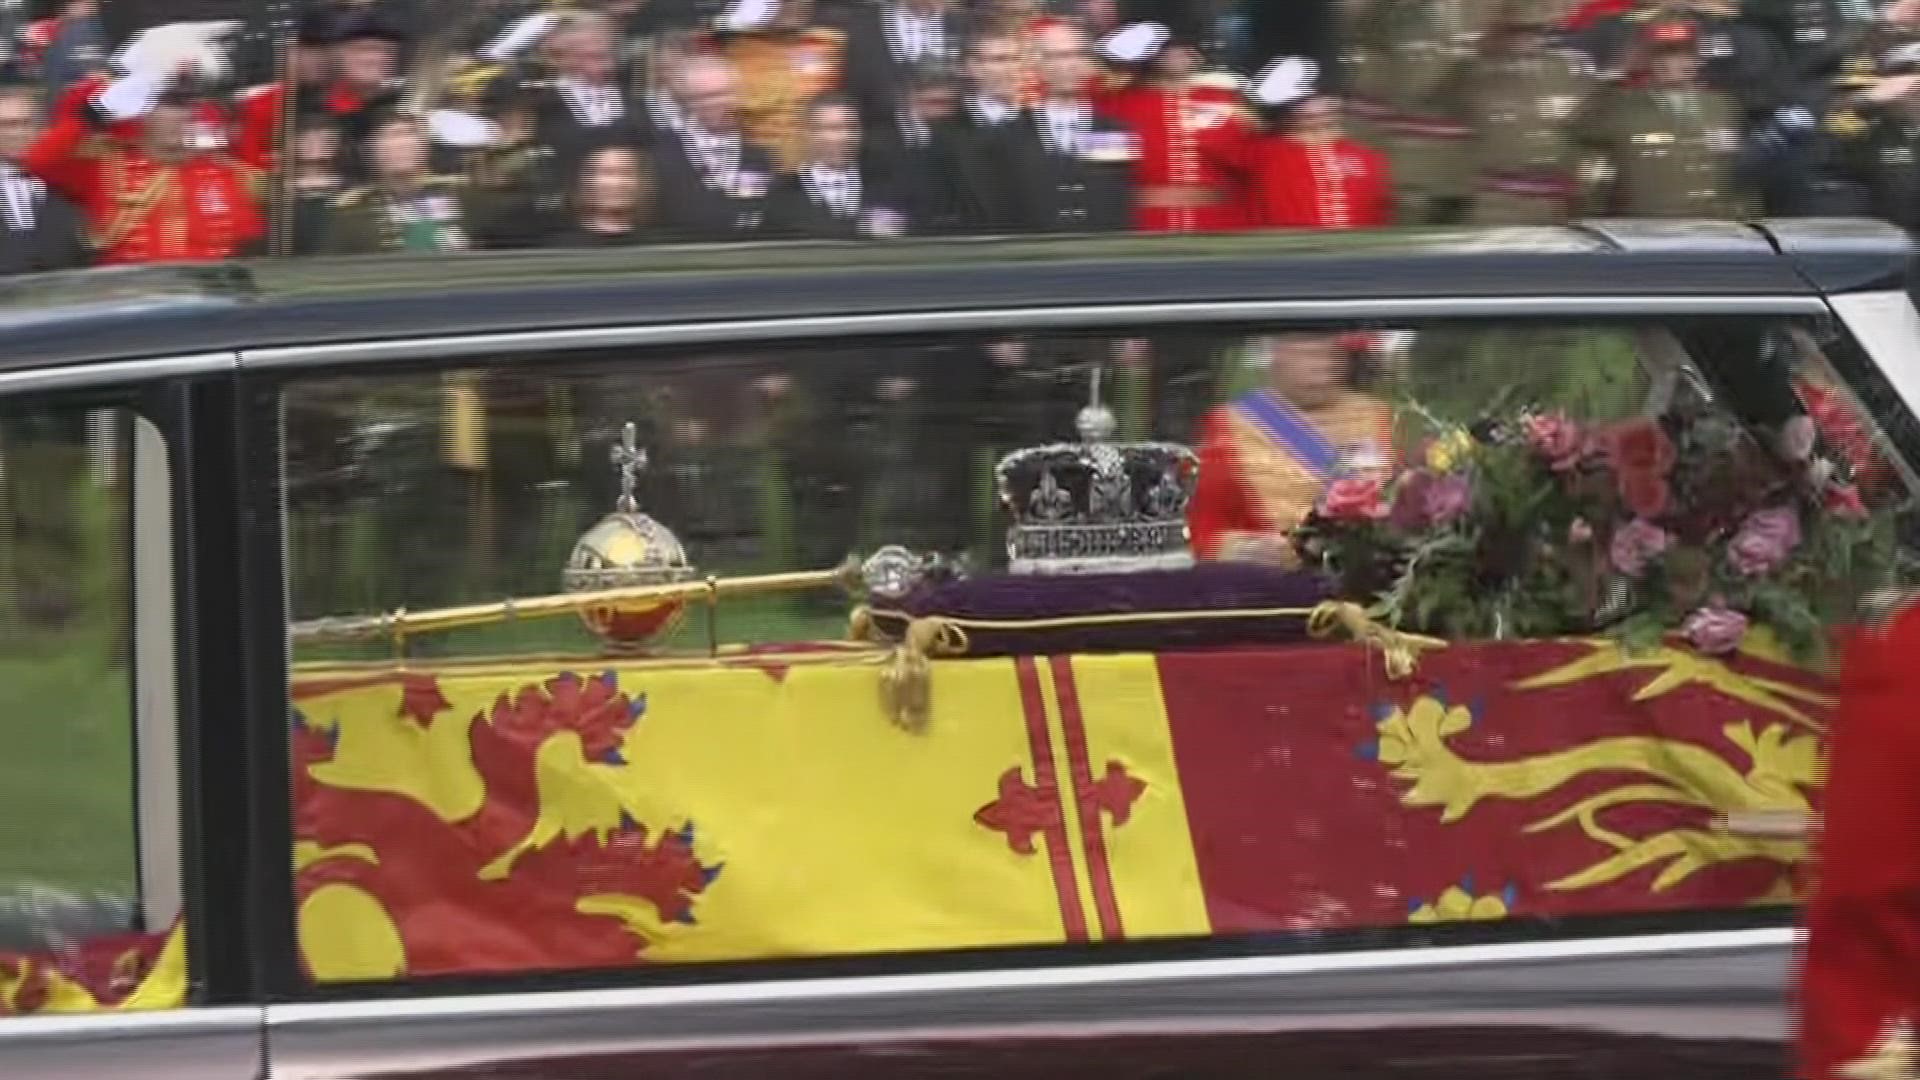 The hearse made its way to Windsor Castle after a stop at Wellington Arch. (CNN Newsource)